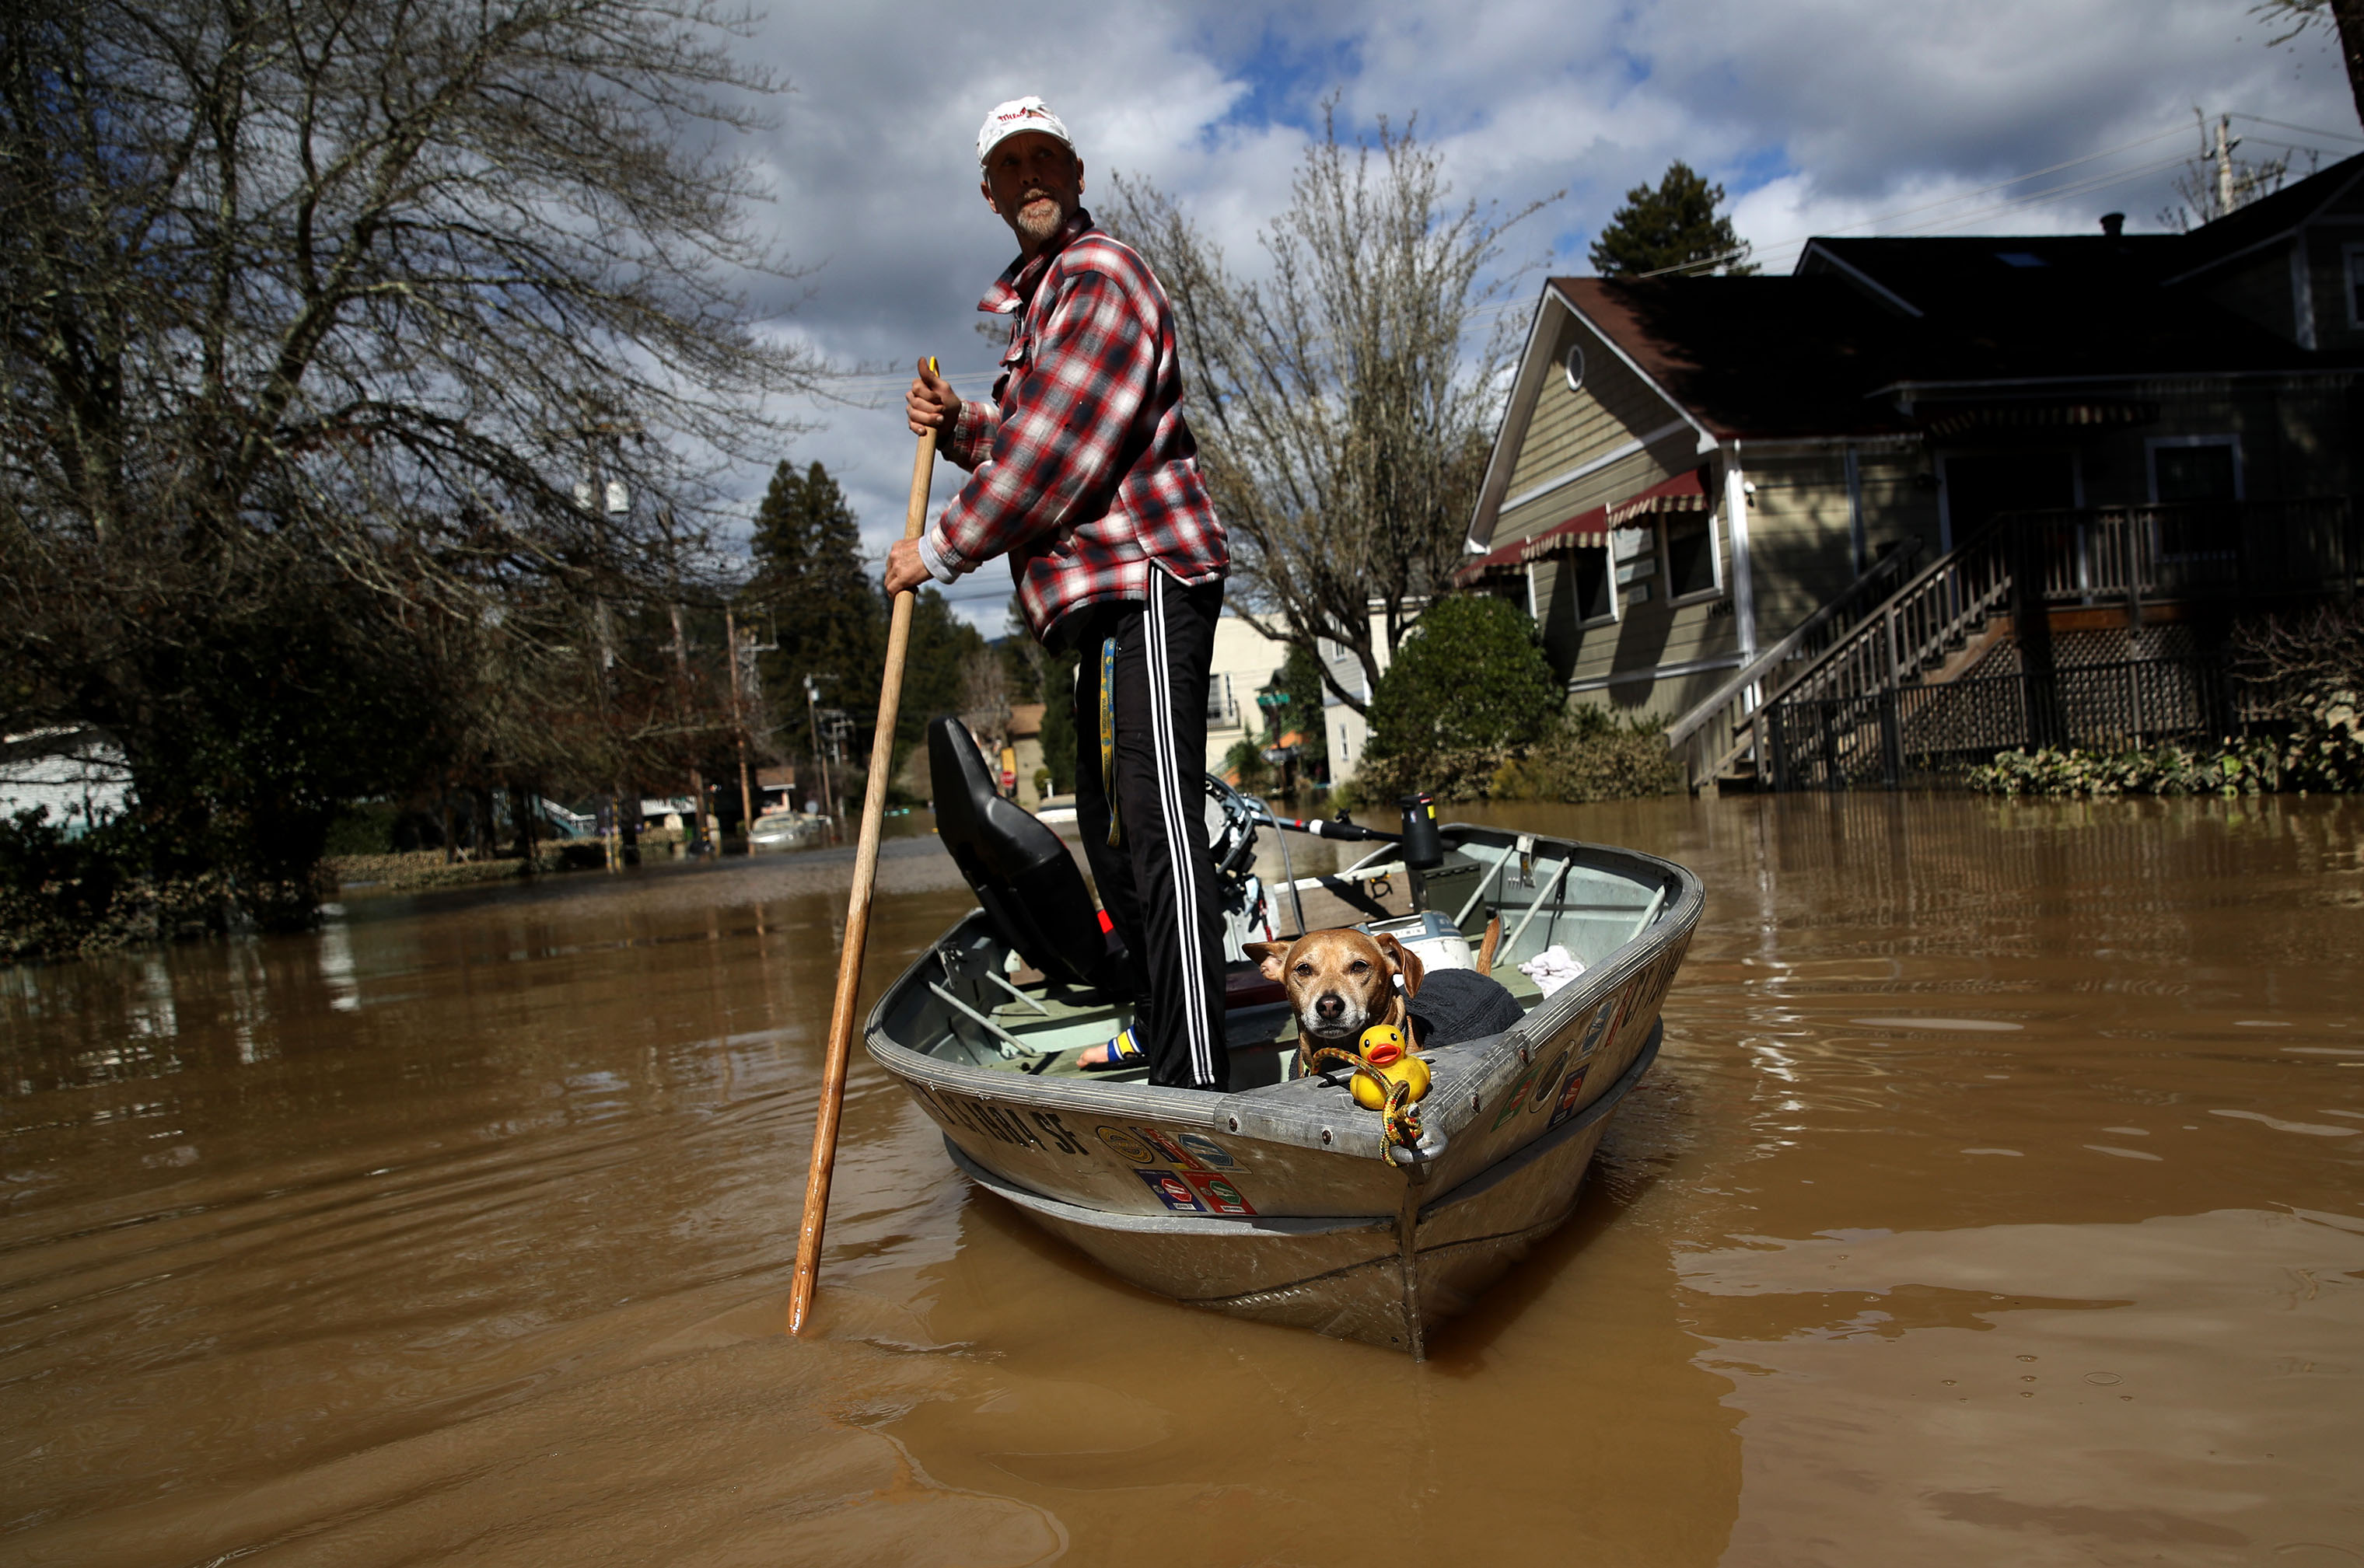 A resident and his dog navigate through a flooded neighborhood on Feb. 28, 2019 in Guerneville, California. (Justin Sullivan—Getty Images)